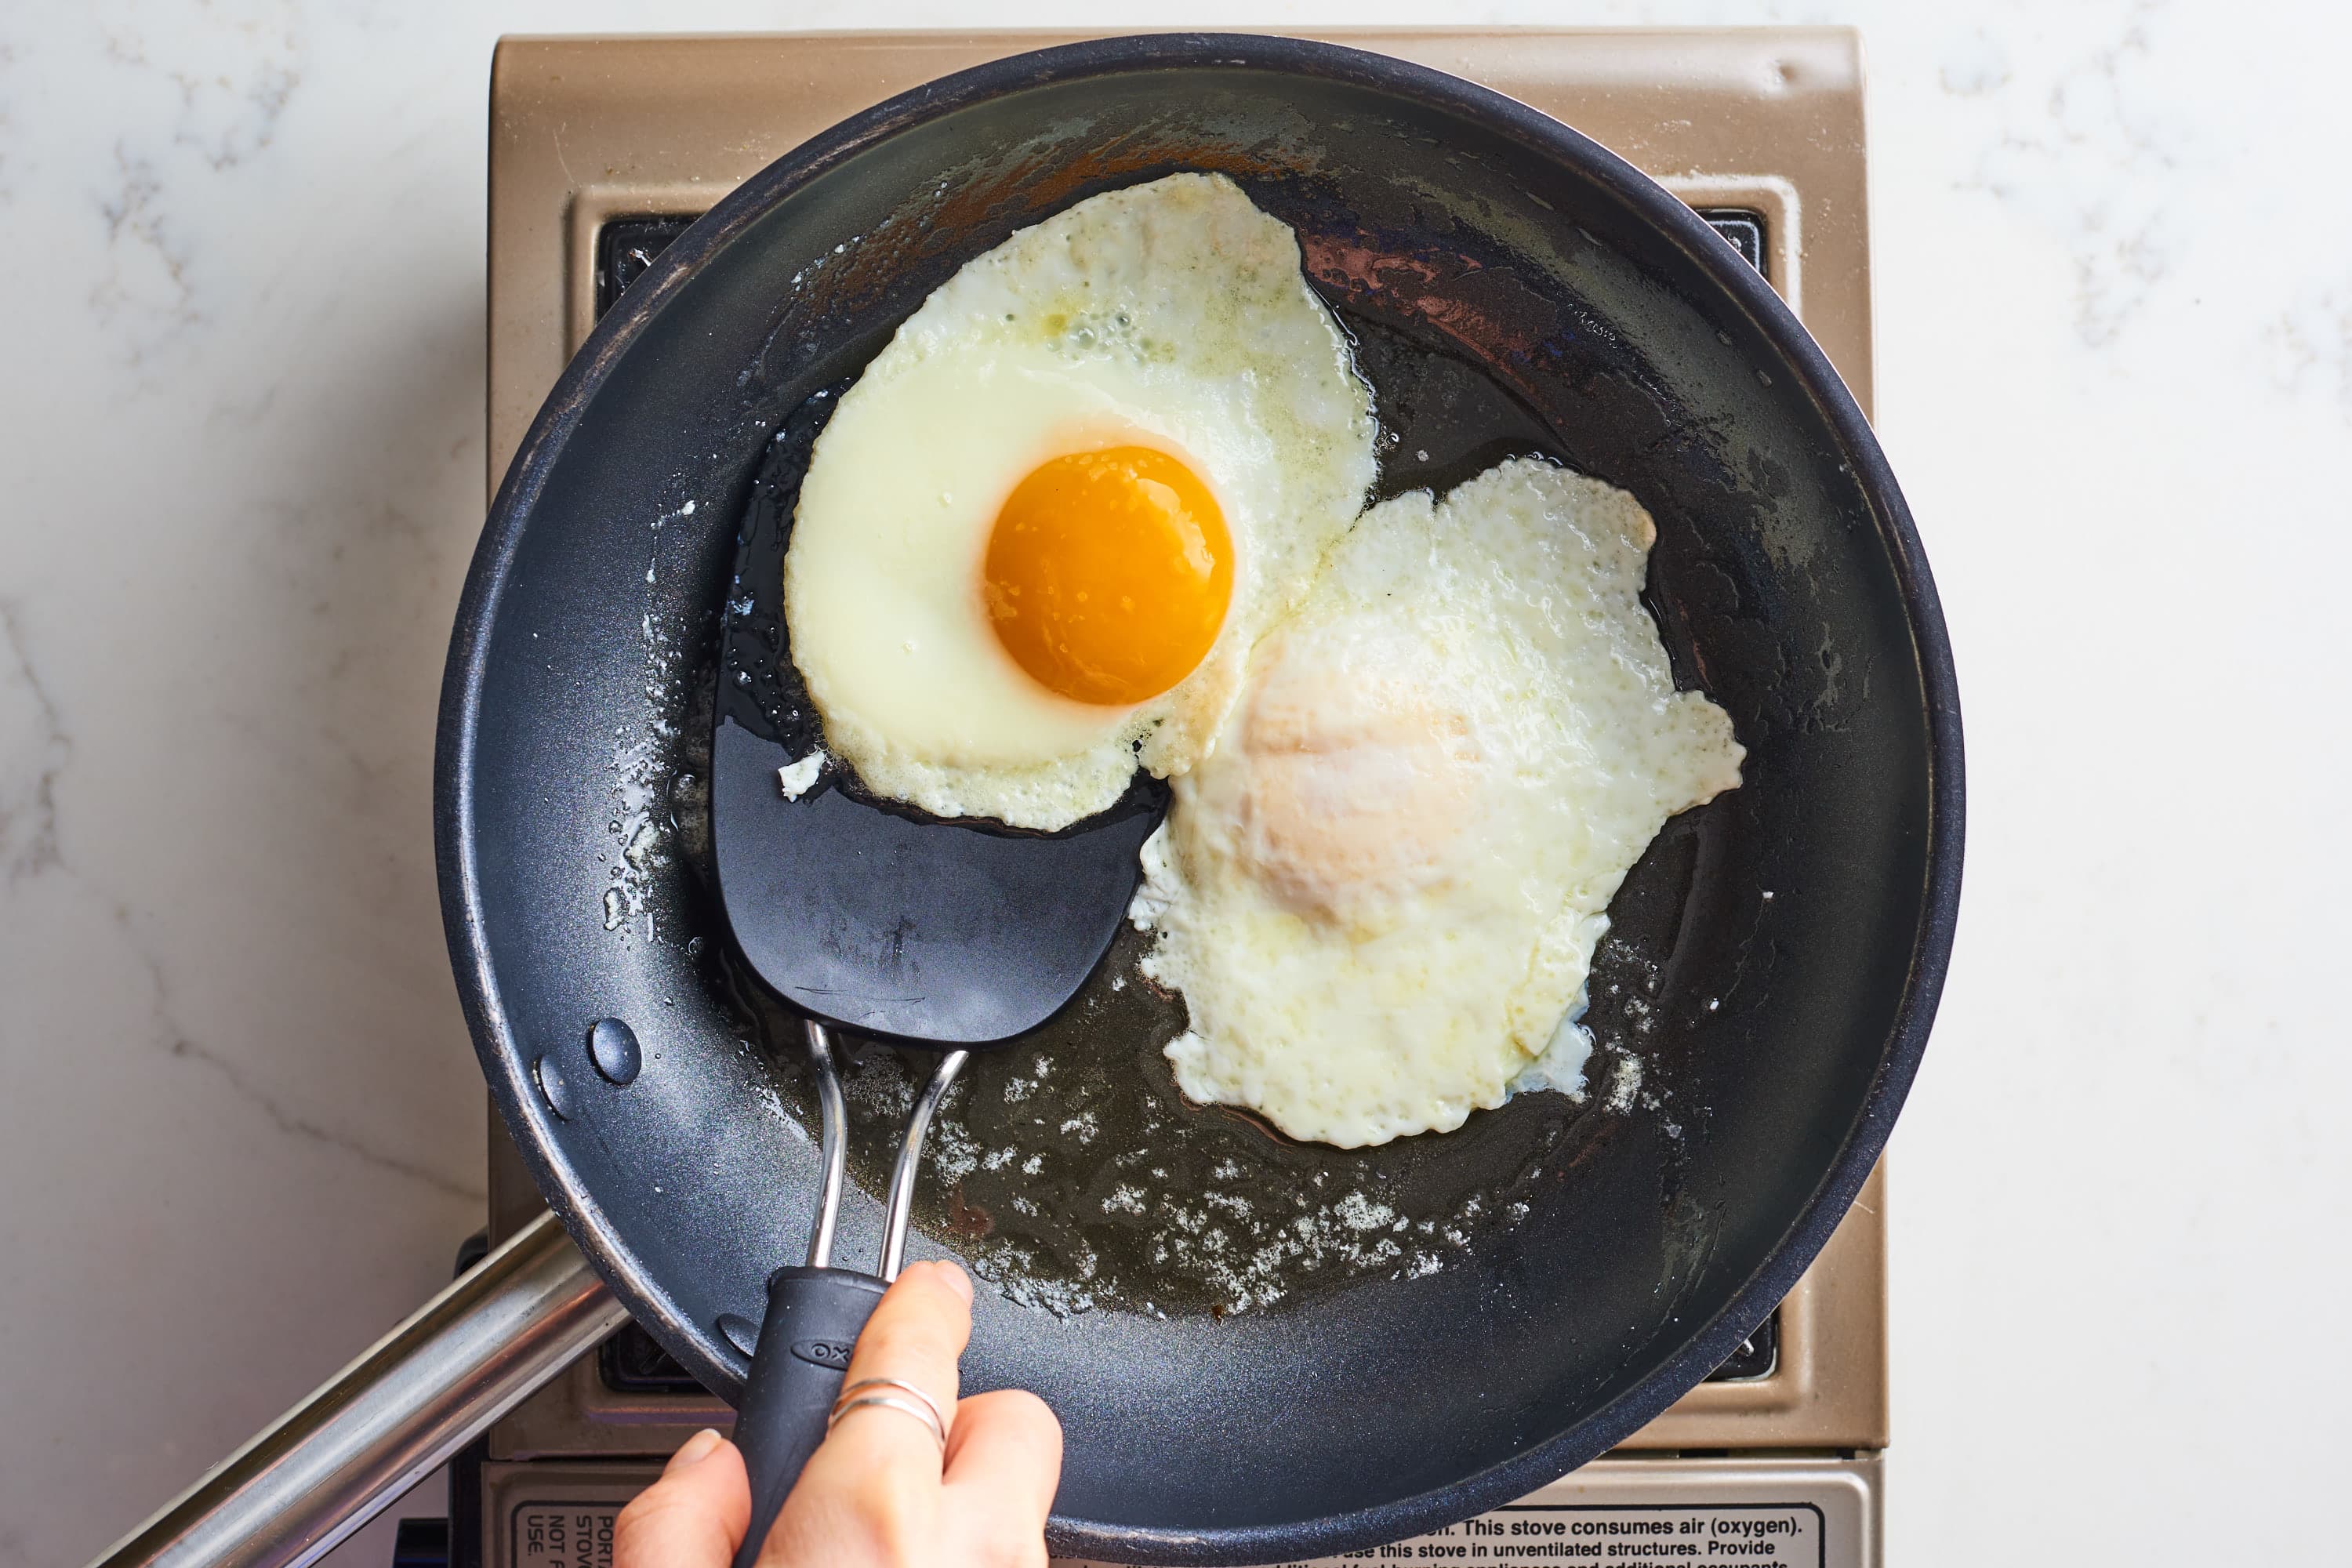 https://cdn.apartmenttherapy.info/image/upload/v1577132641/k/Photo/Recipes/2020-01-How-to-Make-a-Perfect-Over-Easy-Egg/How-to-Make-a-Perfect-Over-Easy-Egg_024.jpg